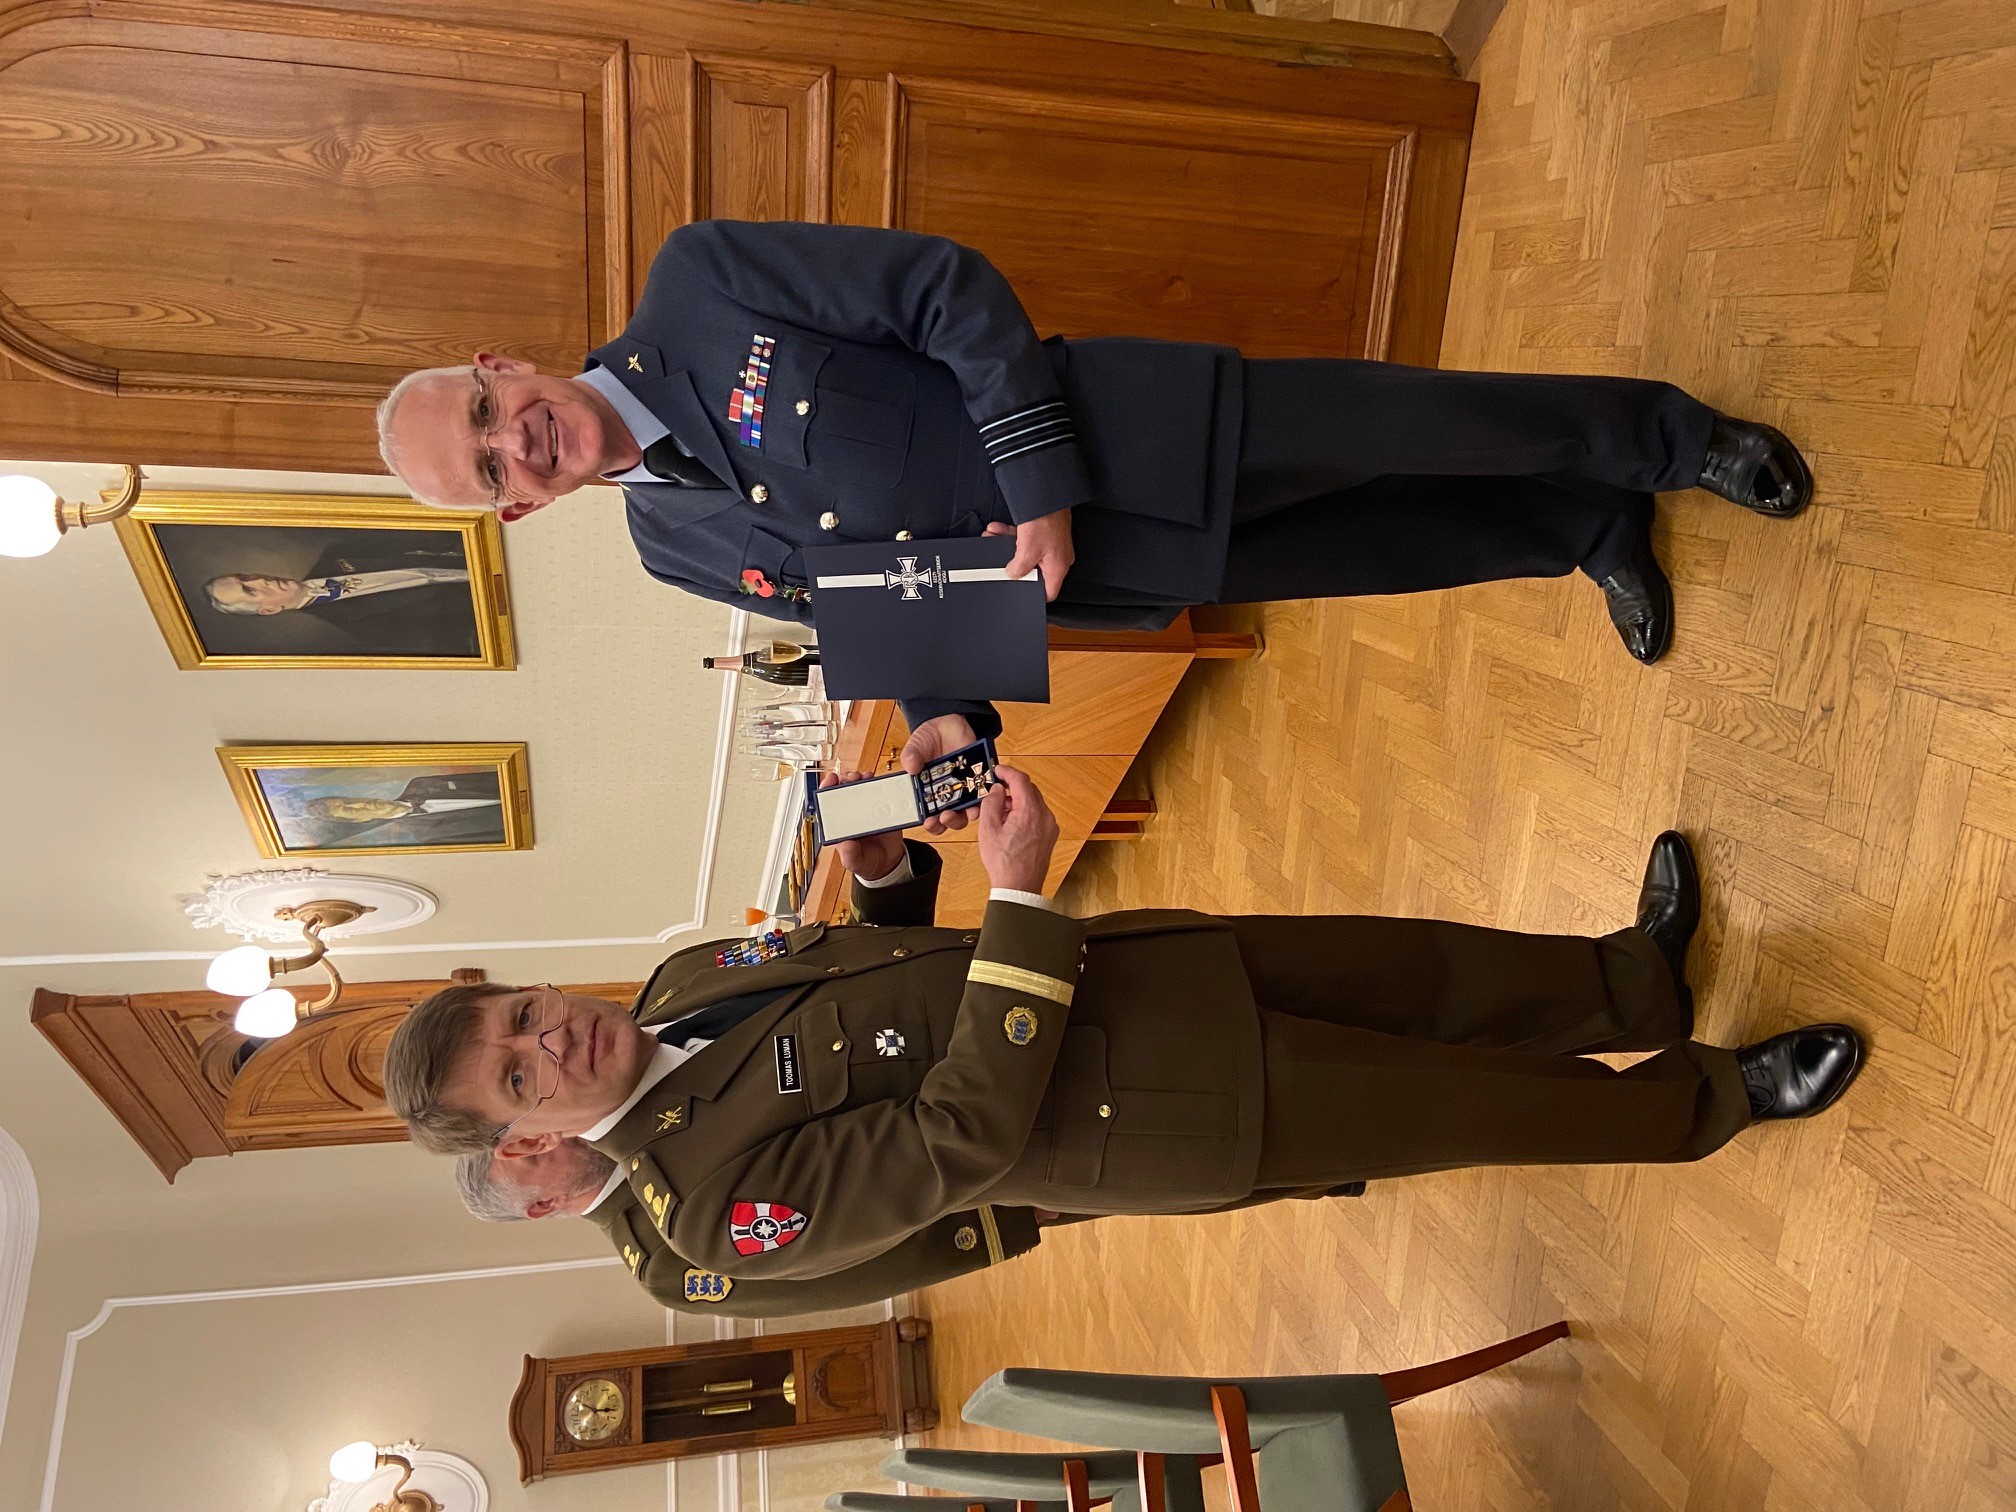 Wing Commander Graham Banks, an RAF Reservist from Number 4626 Squadron, has received a prestigious award for his work with the Estonian military